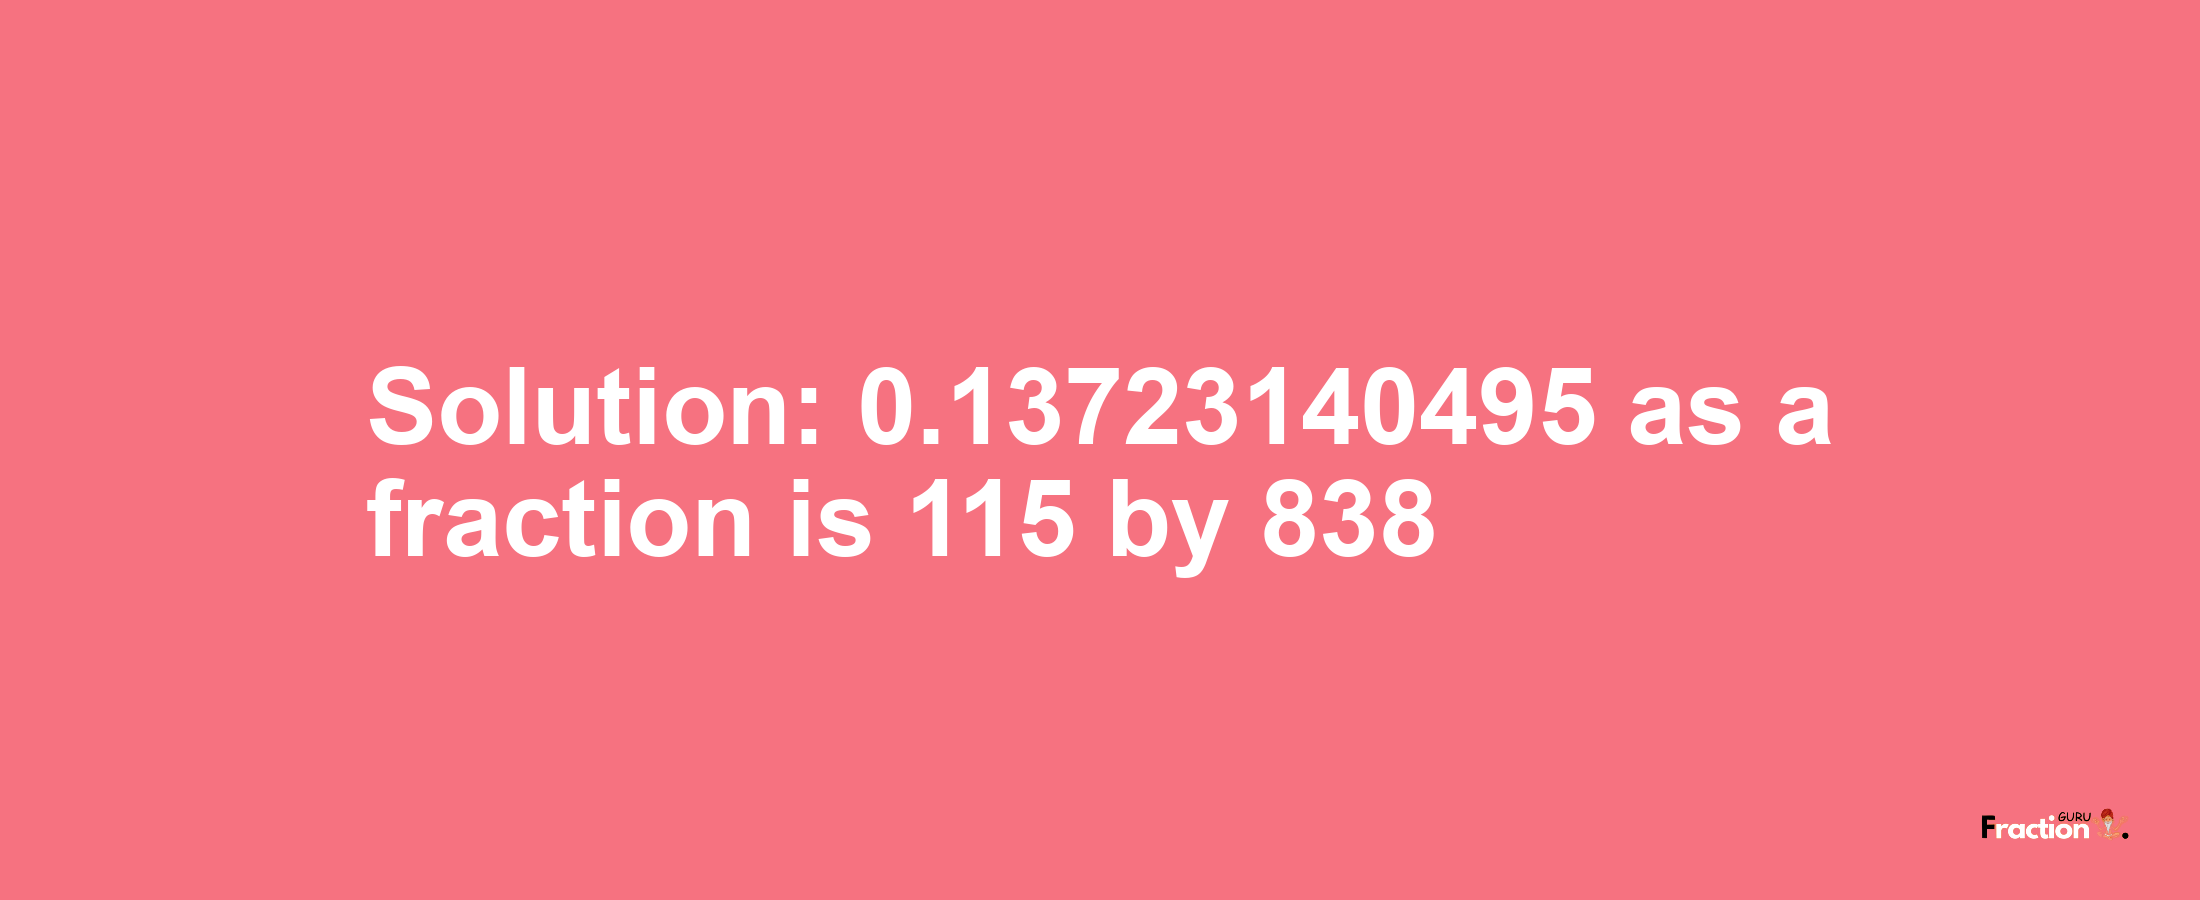 Solution:0.13723140495 as a fraction is 115/838